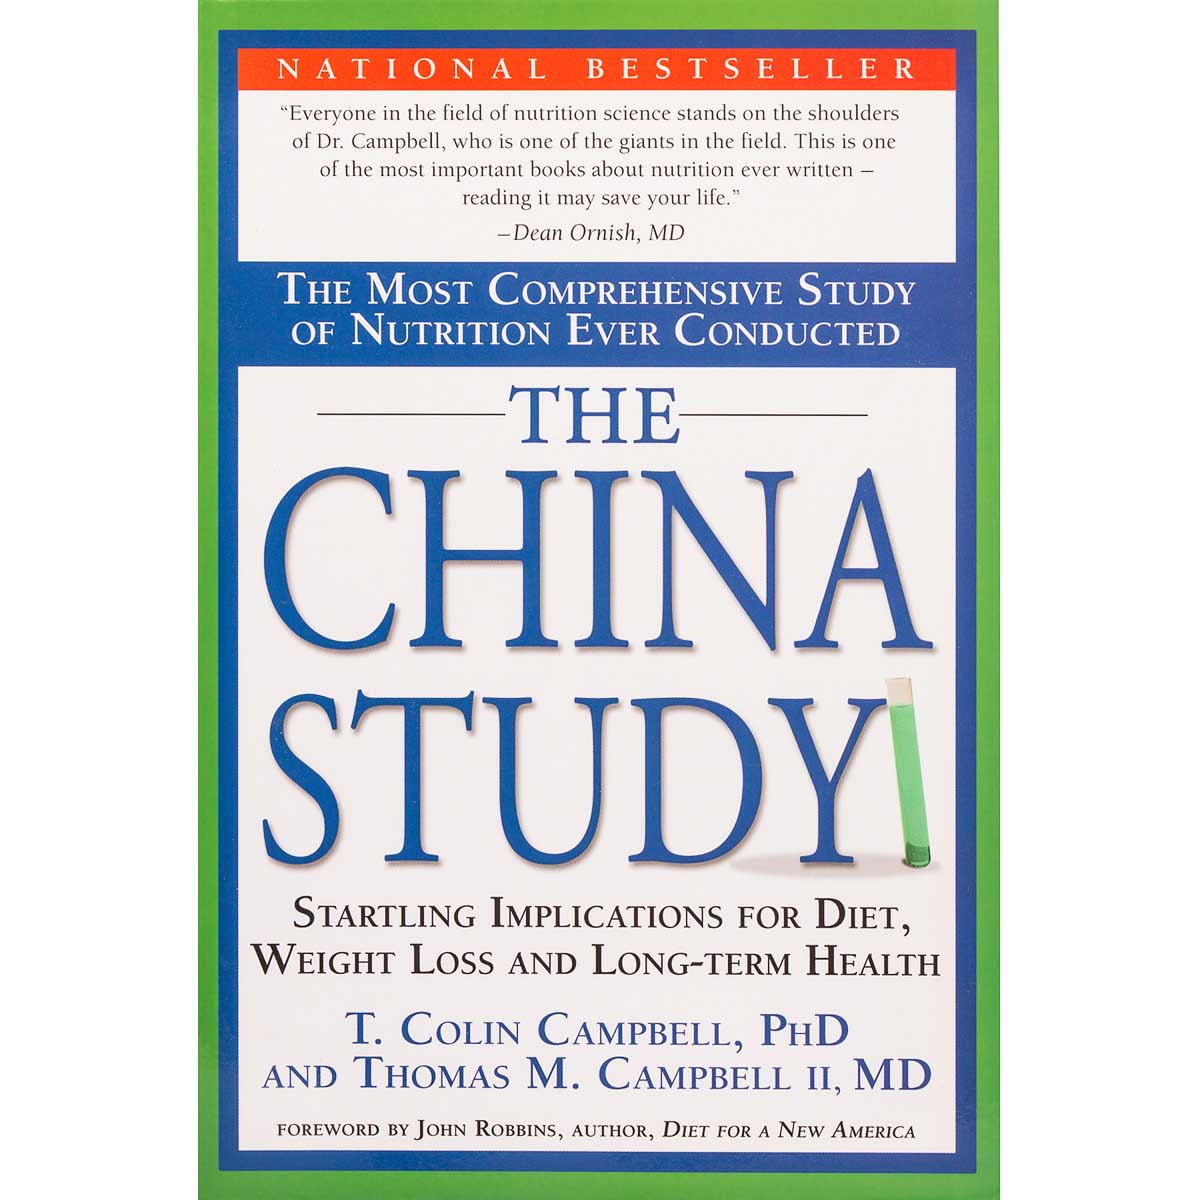 The China Study | Colin Campbell | Raw Living UK | Books | The China Study by Colin Campbell examines over 350 health variables using surveys from 6,500 adults. It explores the relationships between disease and diet.